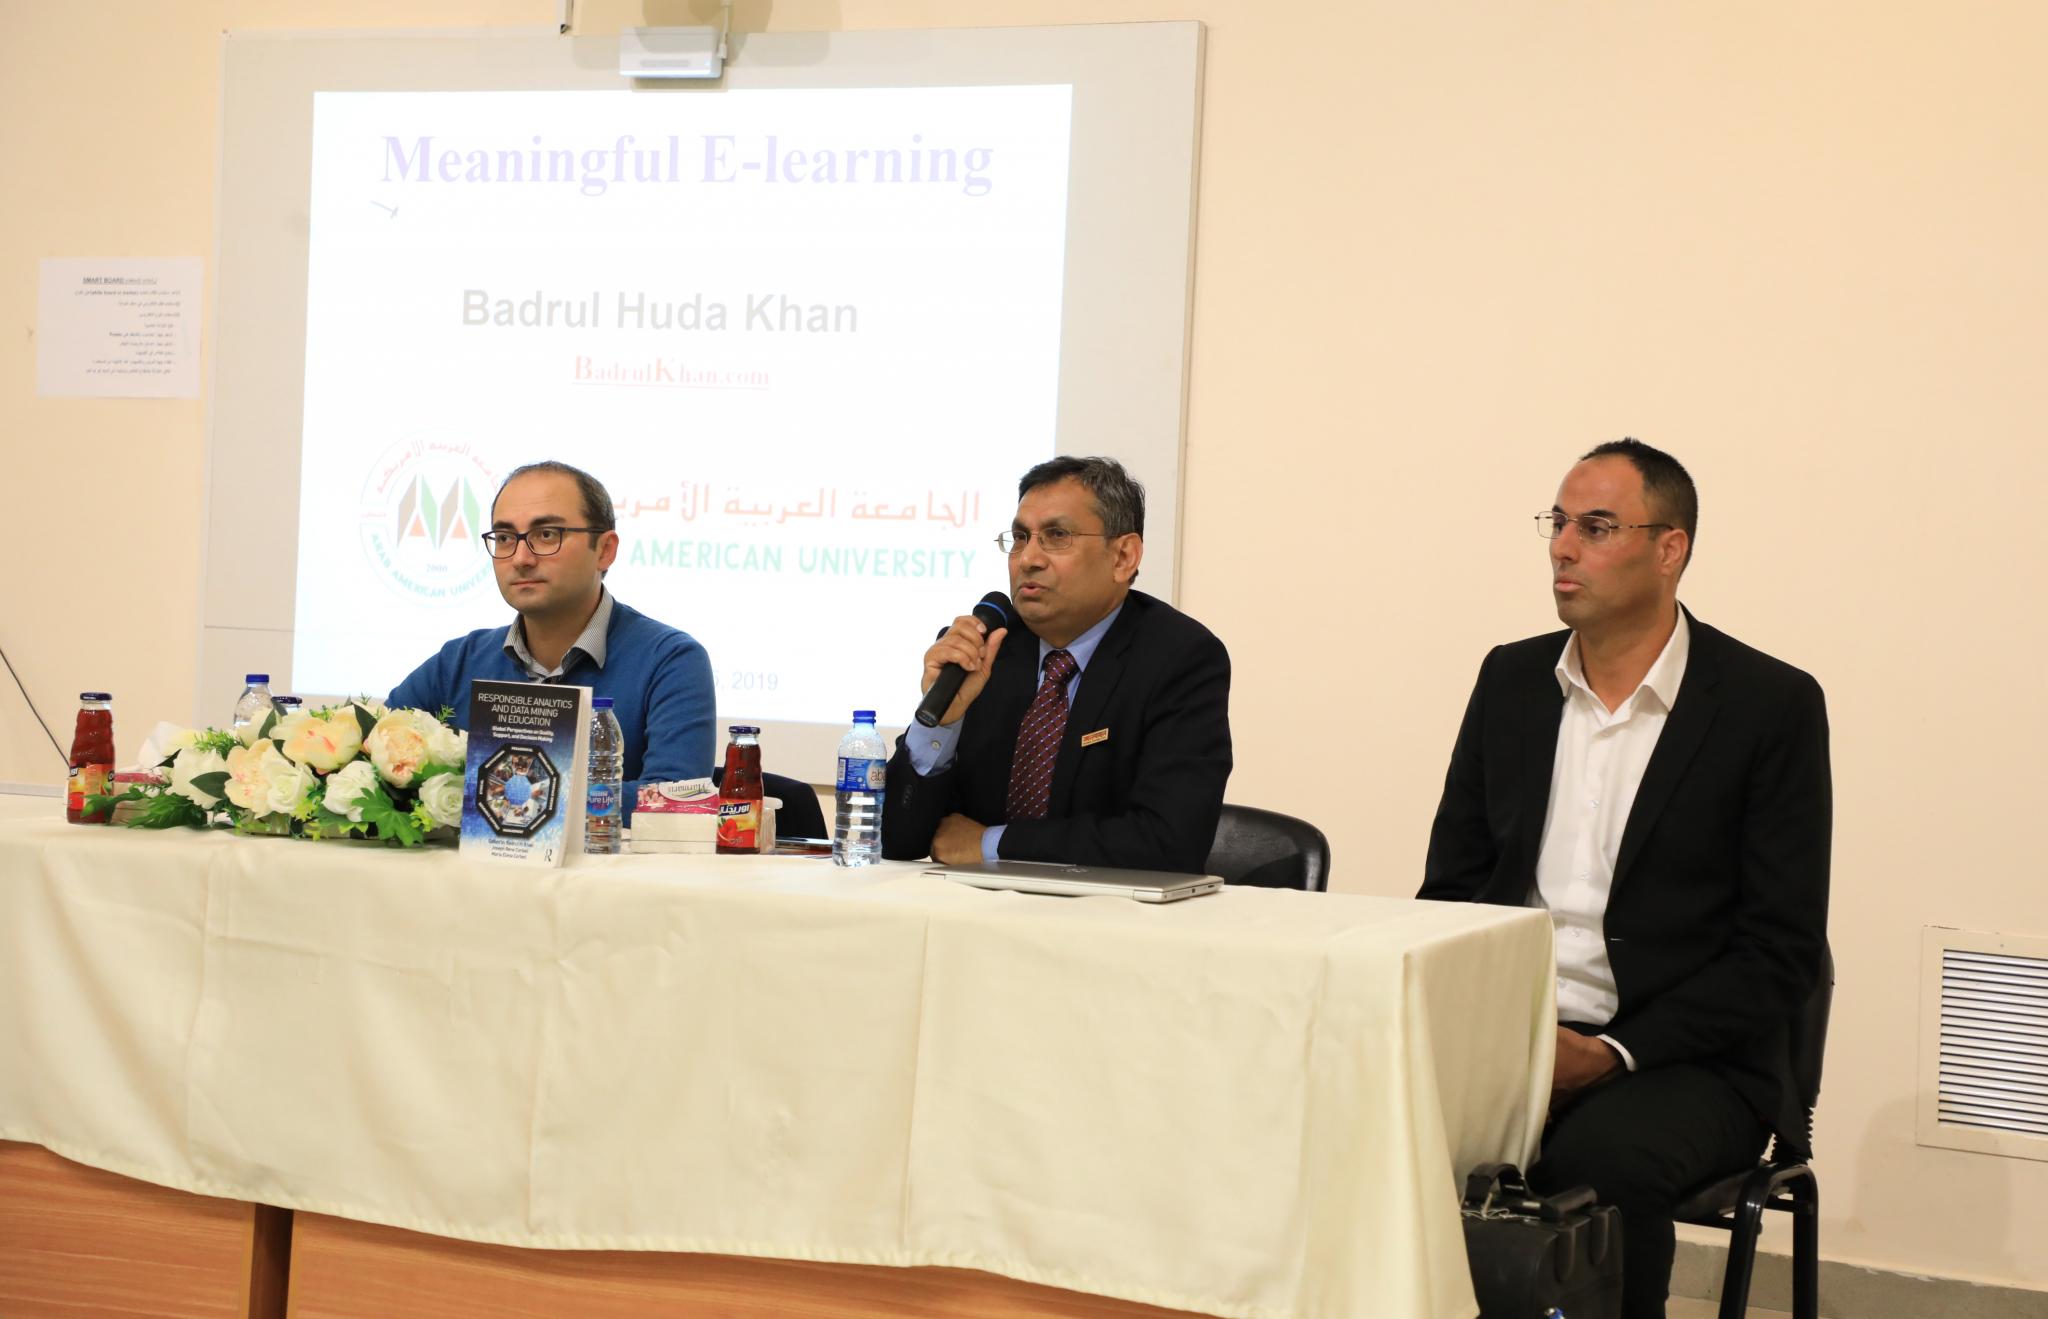 AAUP Hosts the International Expert Bader ALHuda Khan in a Workshop about E-Learning